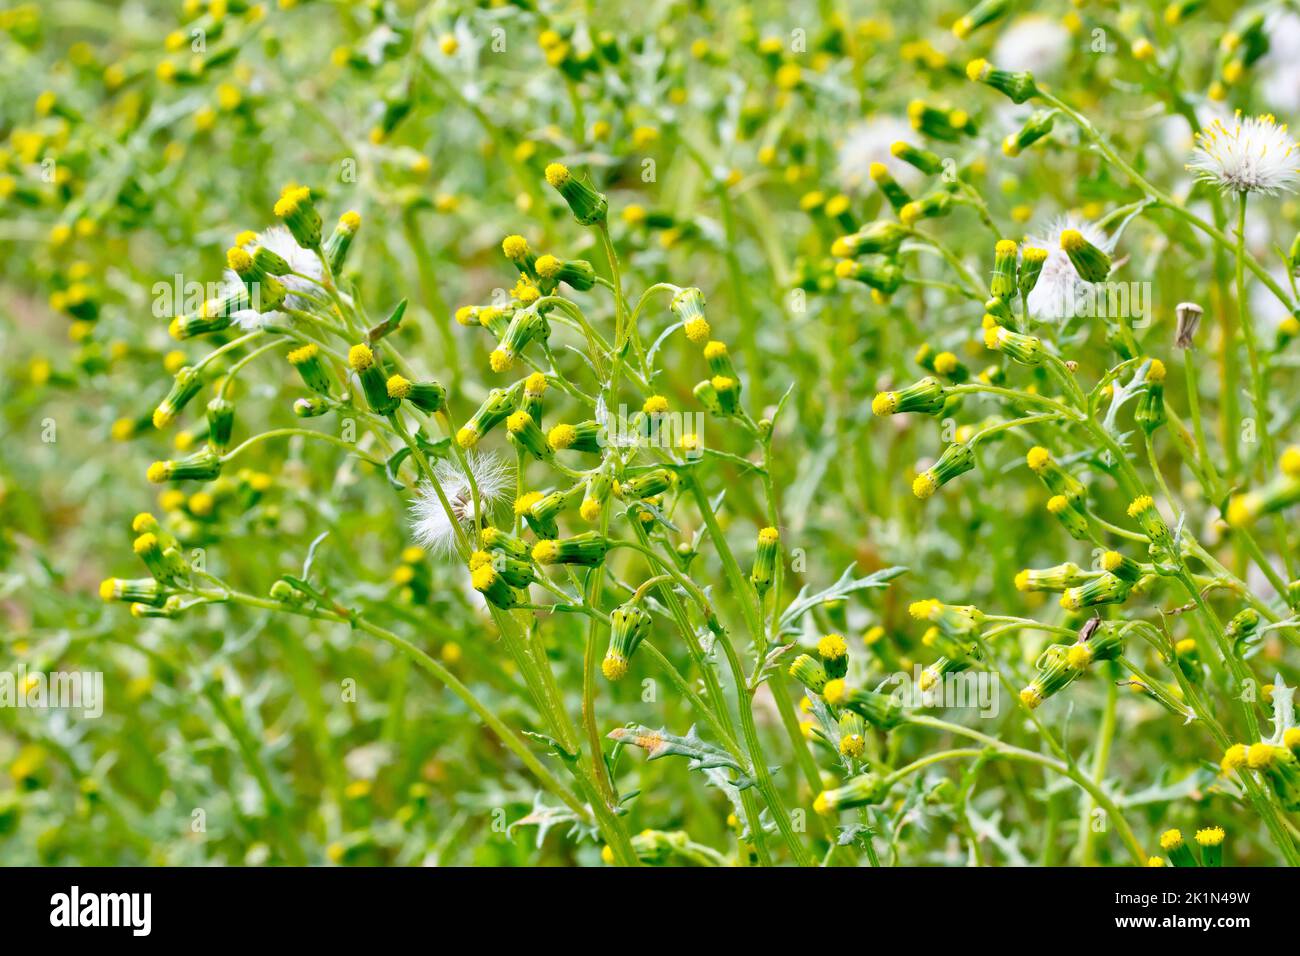 Groundsel (senecio vulgaris), close up of a mass of the common weed showing the tiny flowers and feathery seedheads. Stock Photo